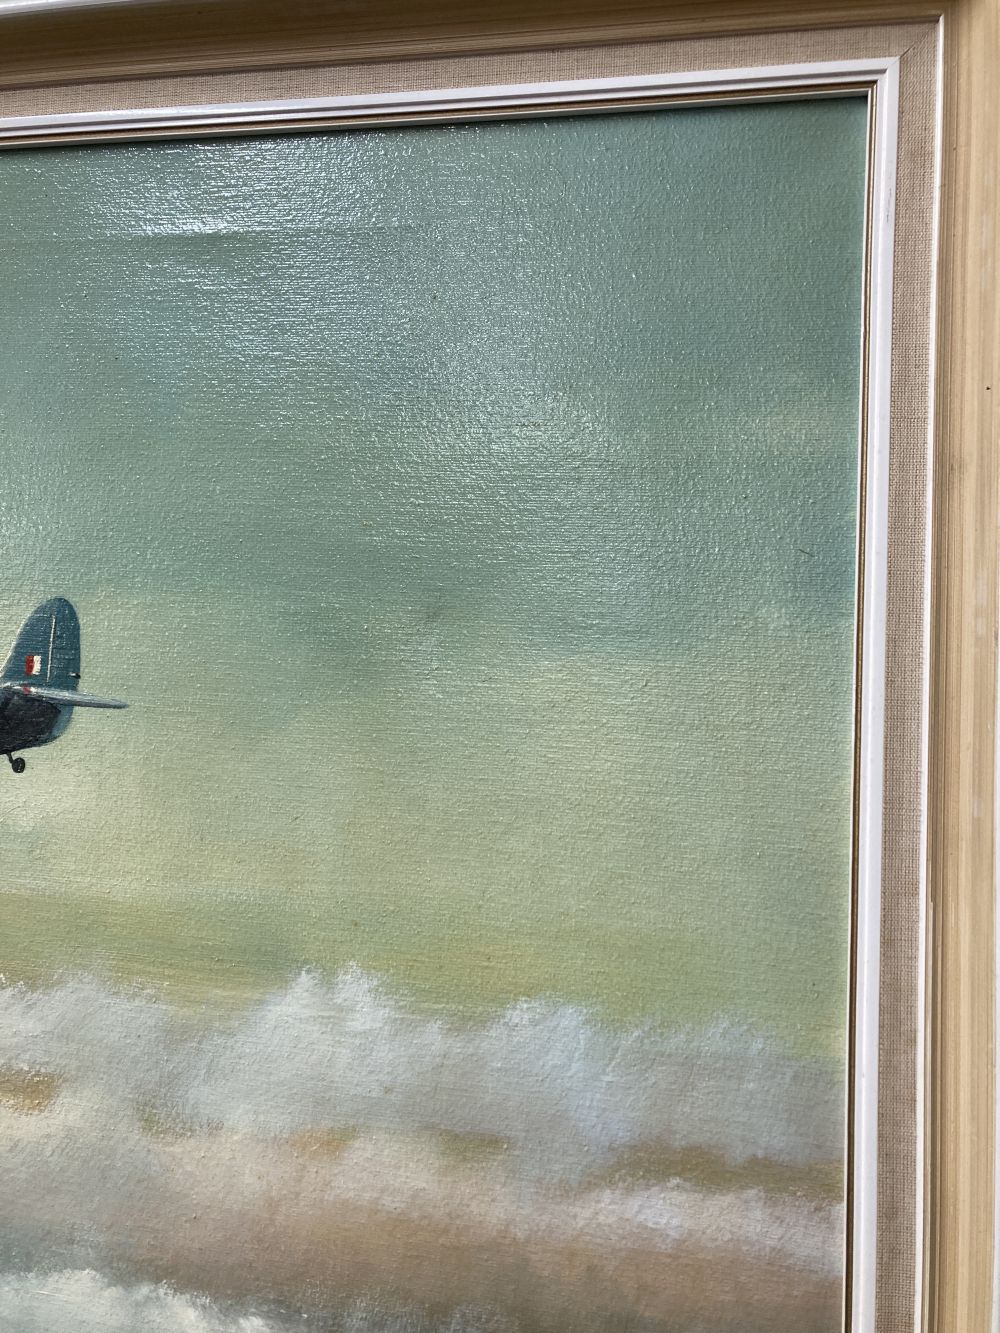 Pears (Dion, 1928-1985). Unmarked Spitfire of the Photographic Reconnaissance Unit, oil on canvas - Image 2 of 5